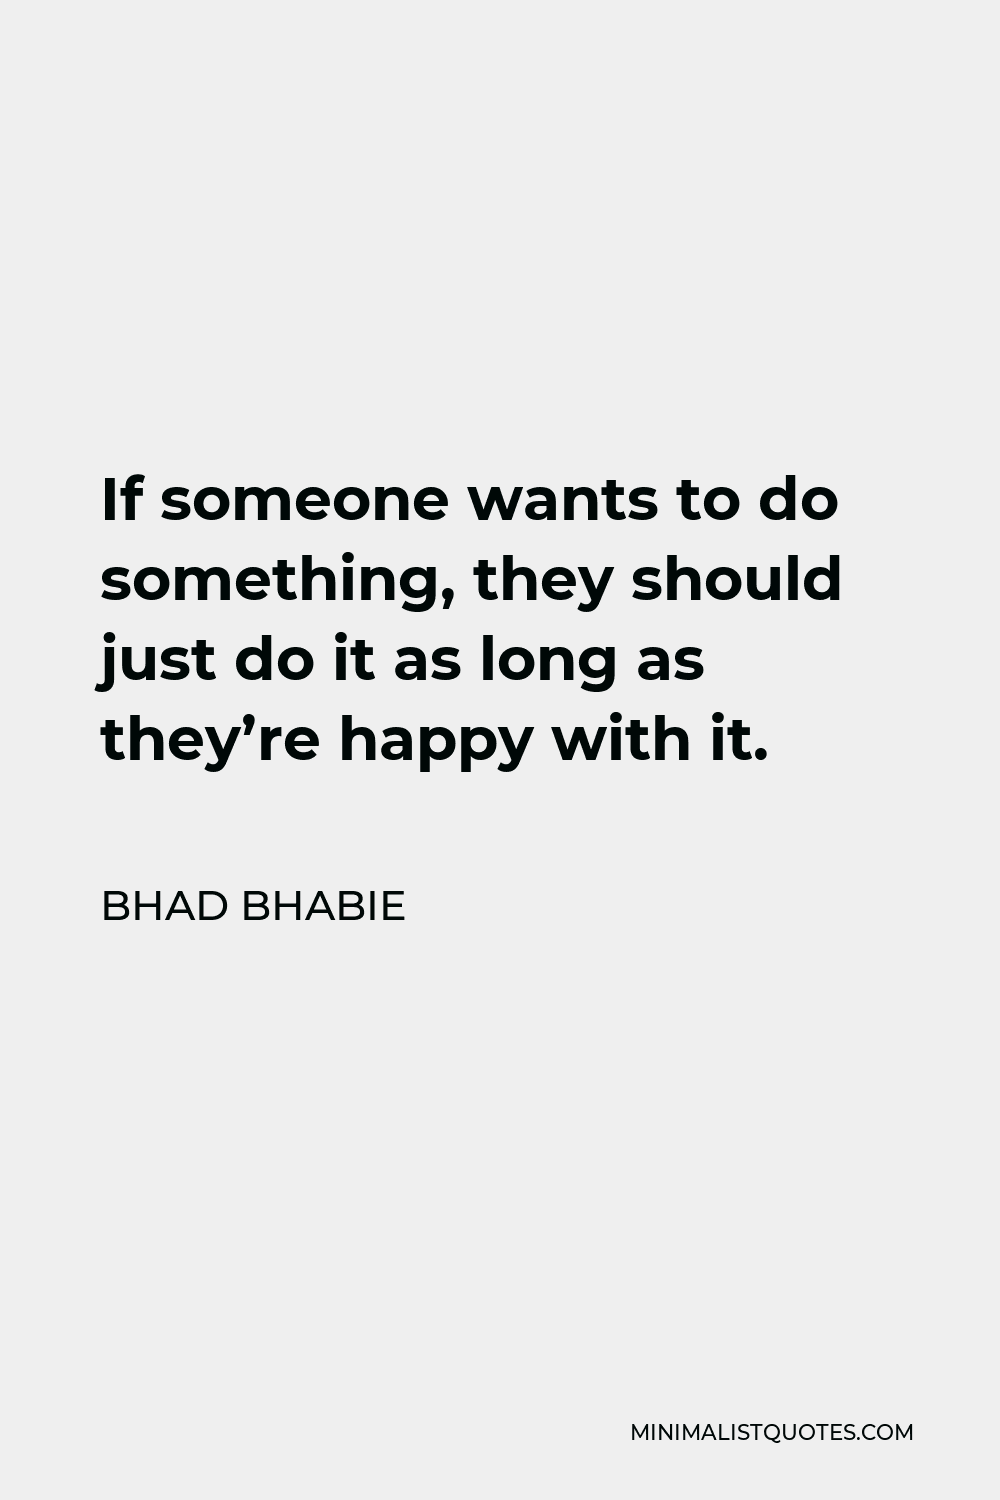 Bhad Bhabie Quote - If someone wants to do something, they should just do it as long as they’re happy with it.